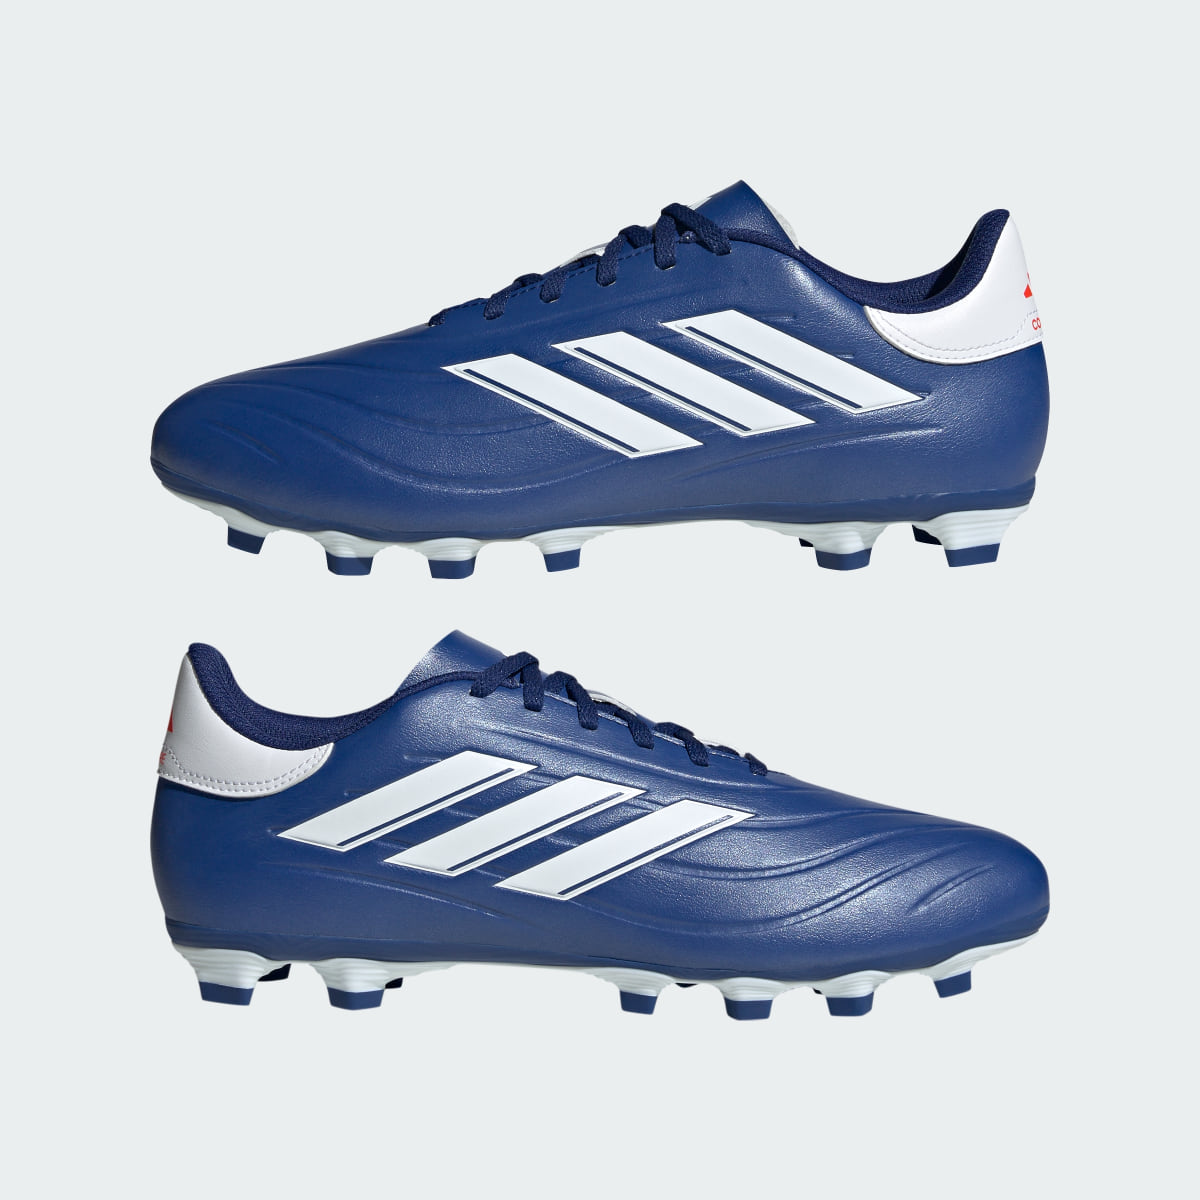 Adidas Copa Pure II.4 Flexible Ground Boots. 8